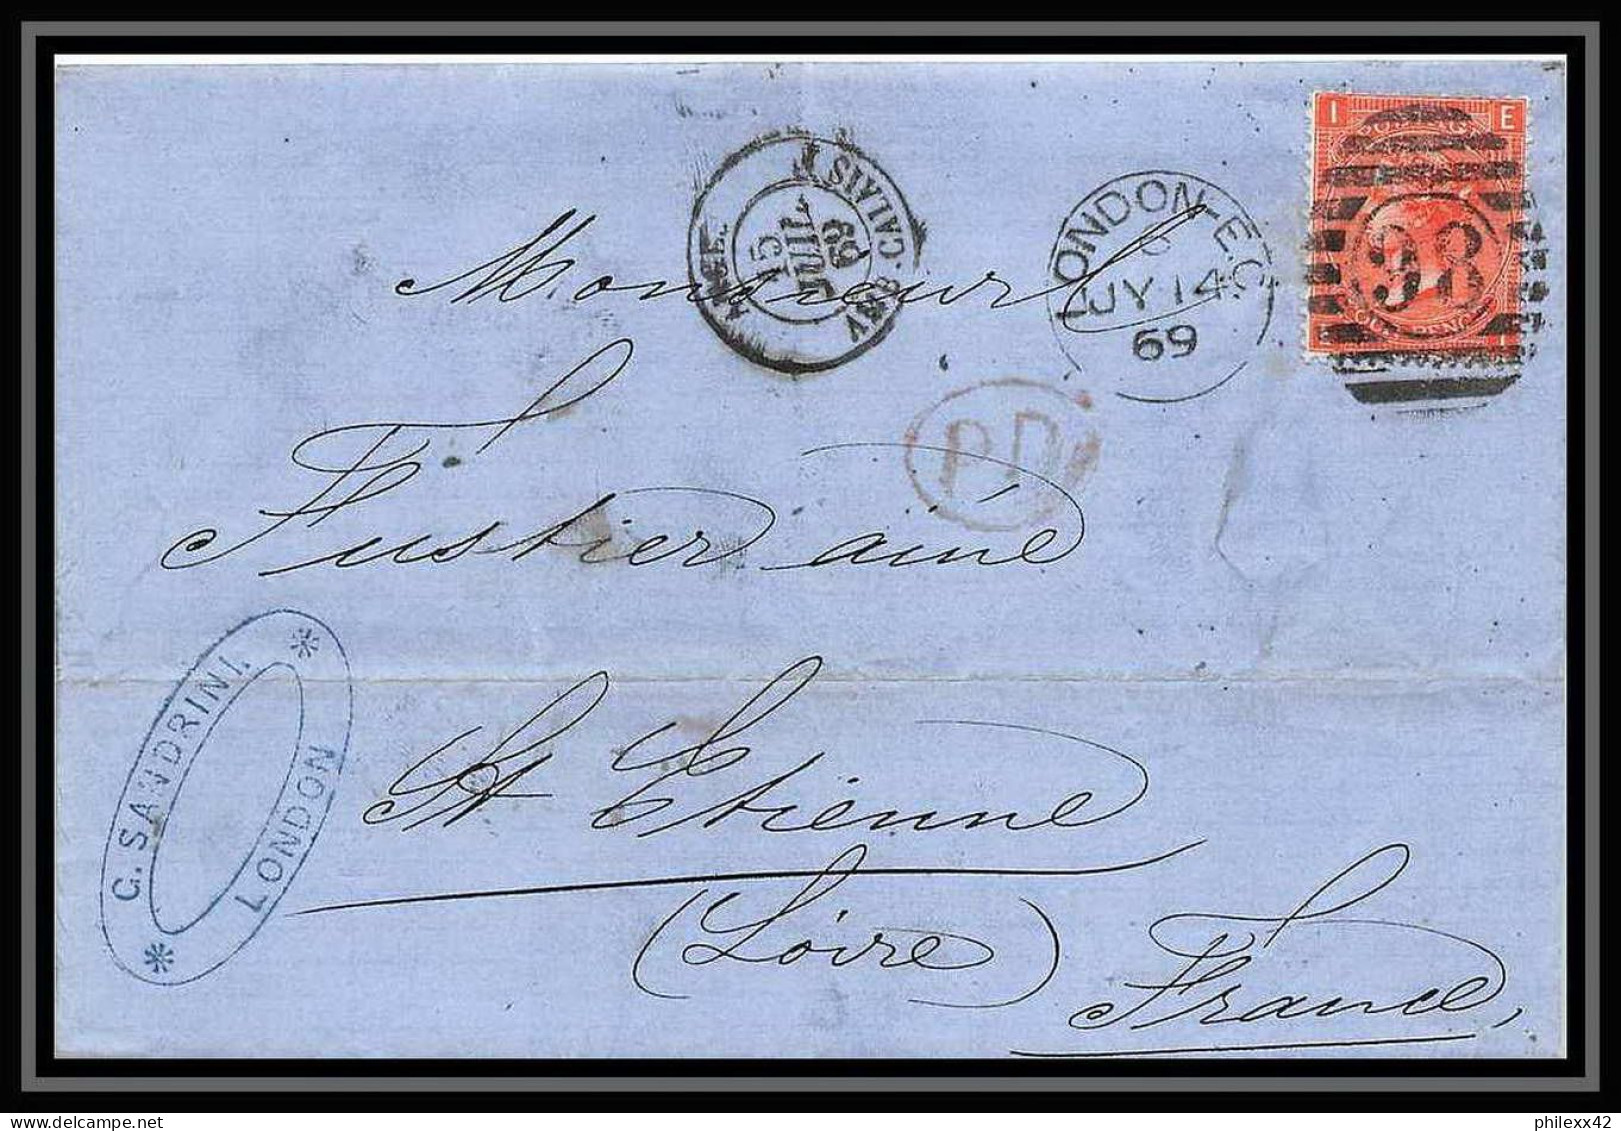 35819 N°32 Victoria 4p Red London St Etienne France 1869 Cachet 98 Lettre Cover Grande Bretagne England - Covers & Documents